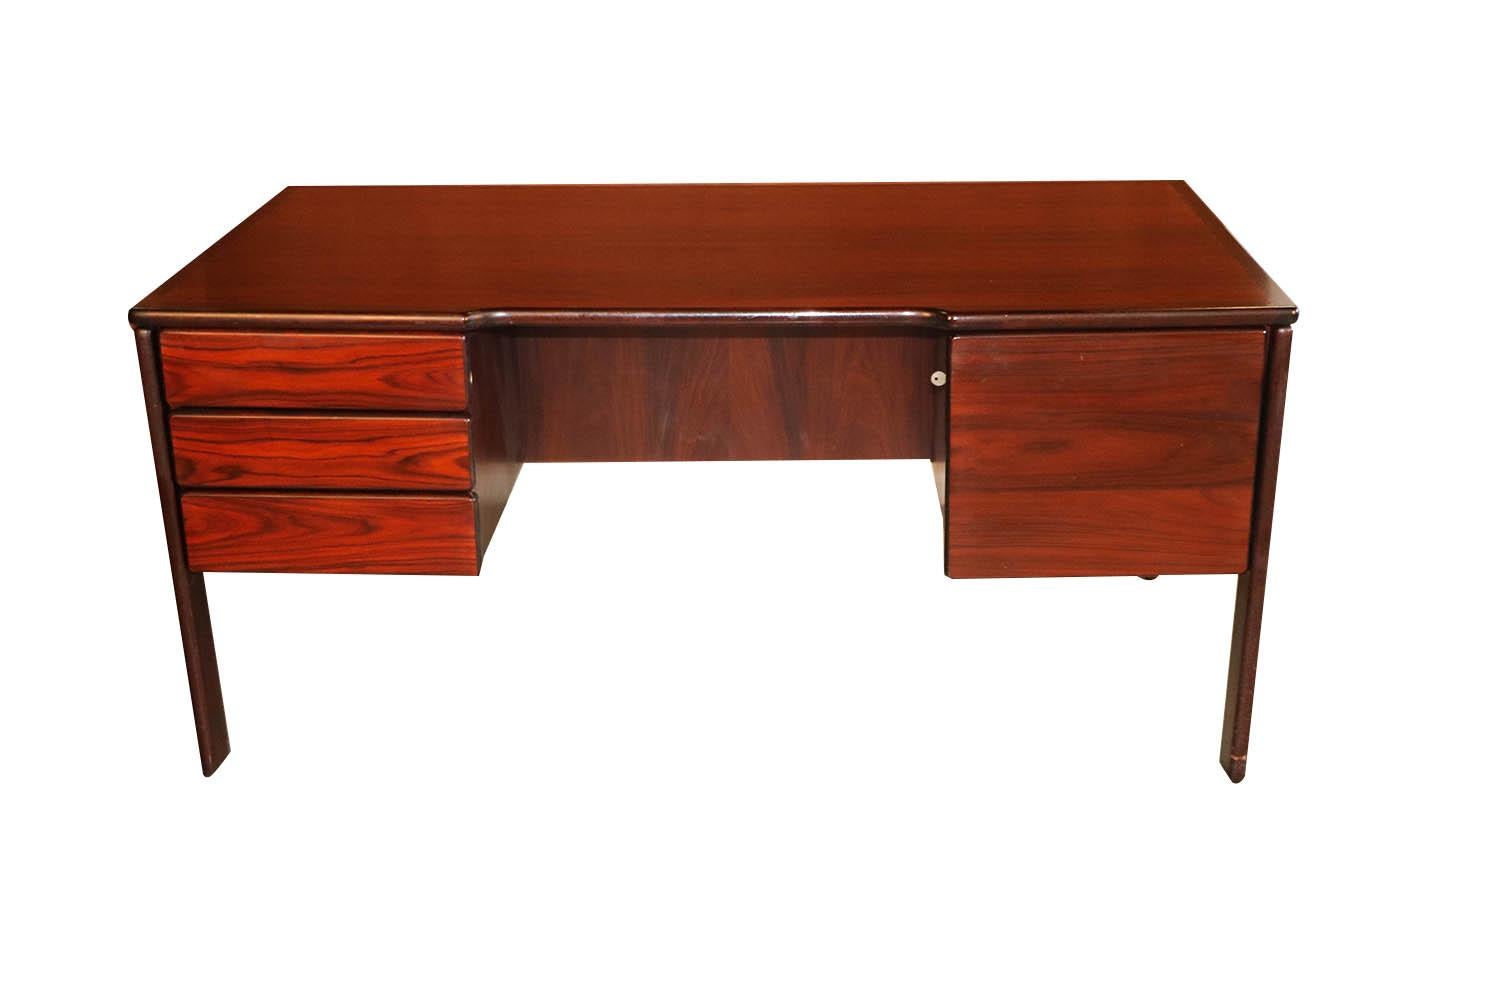 Beautiful remarkable statement in design and craftsmanship. This large midcentury rosewood executive size desk by Bornholm, precisely crafted in exceptional rosewood grain wood, with a fully finished back the finished back side makes this desk ideal